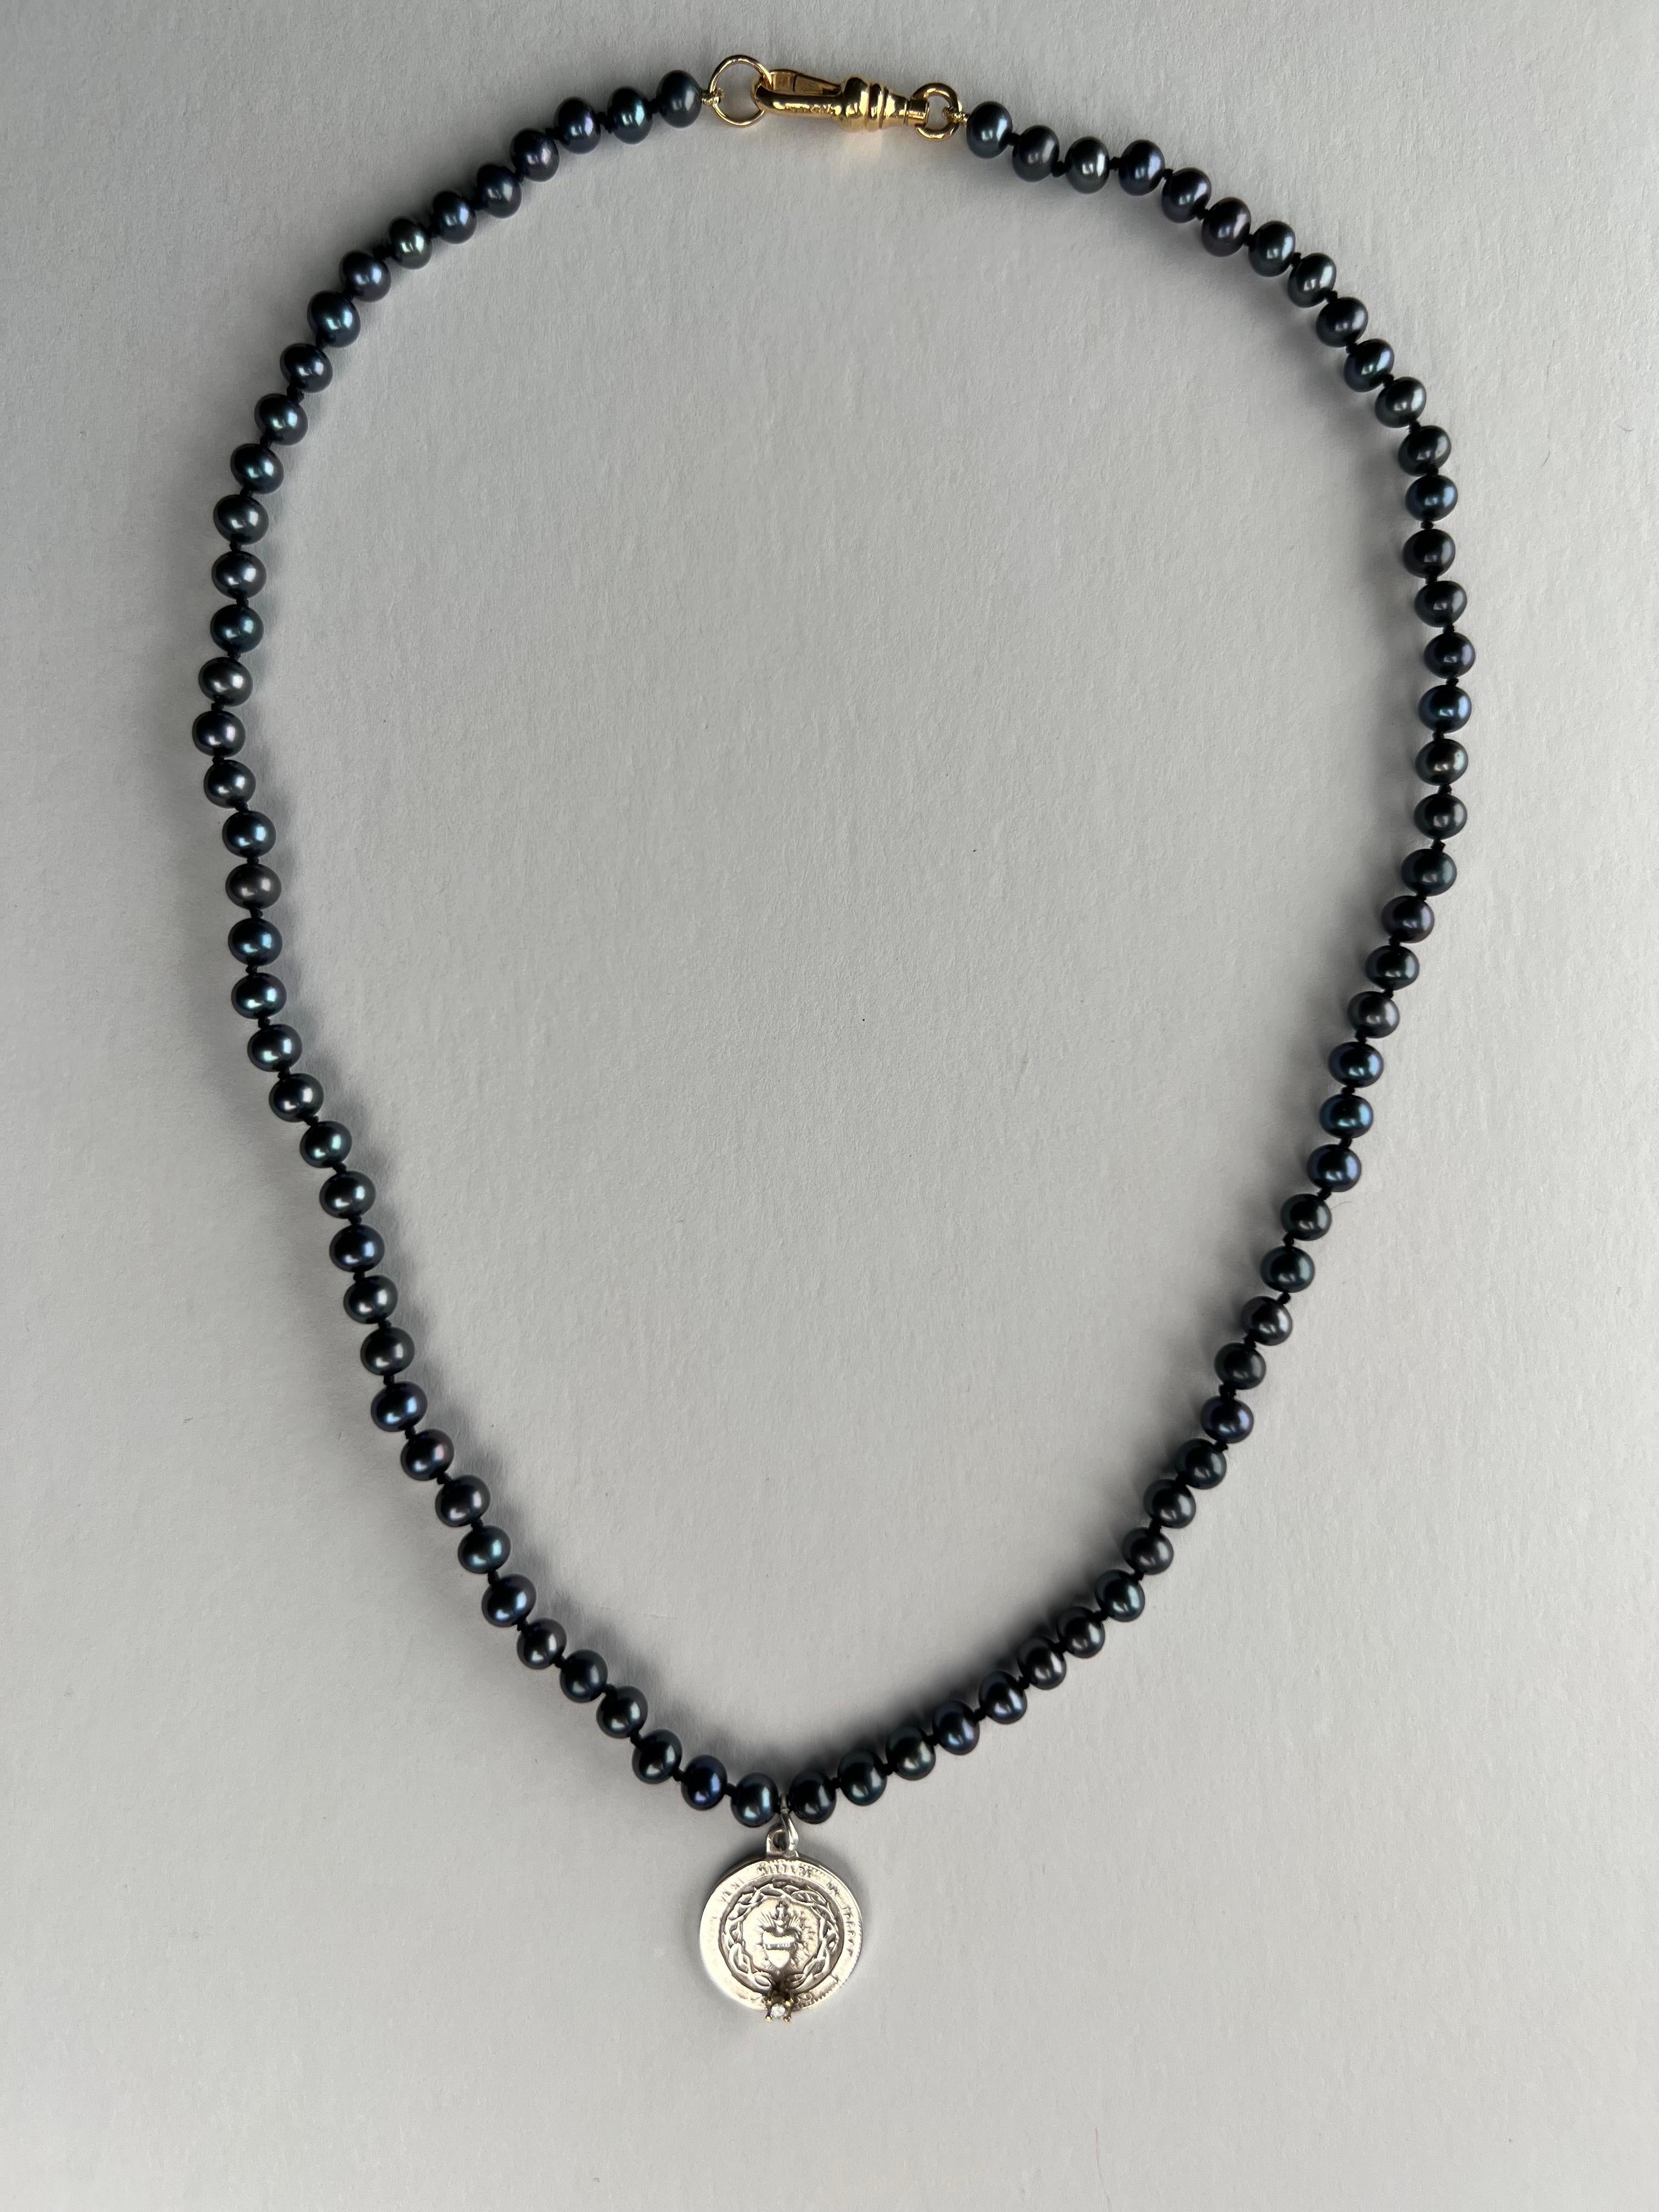 Diamond Silver Sacred Heart Medal Black Pearl Necklace Choker J Dauphin In New Condition For Sale In Los Angeles, CA